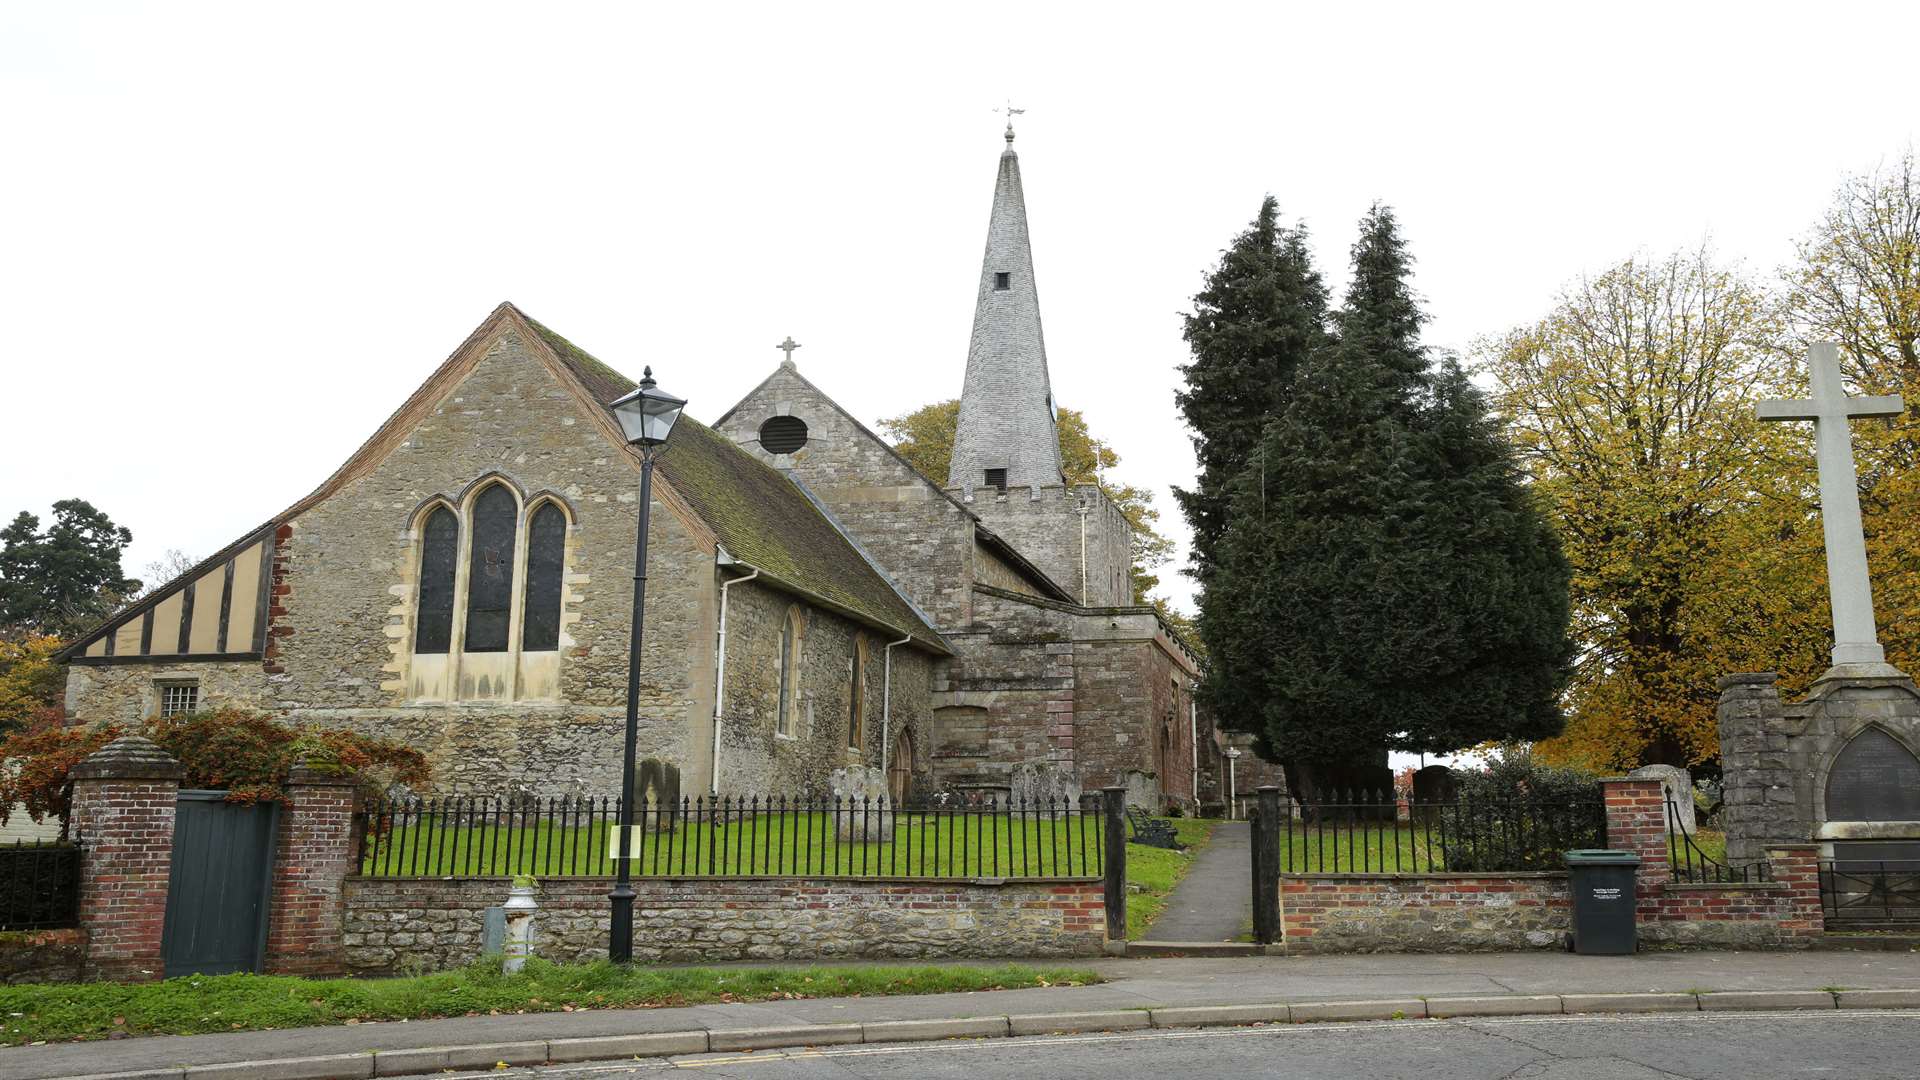 St Mary's Church in West Malling